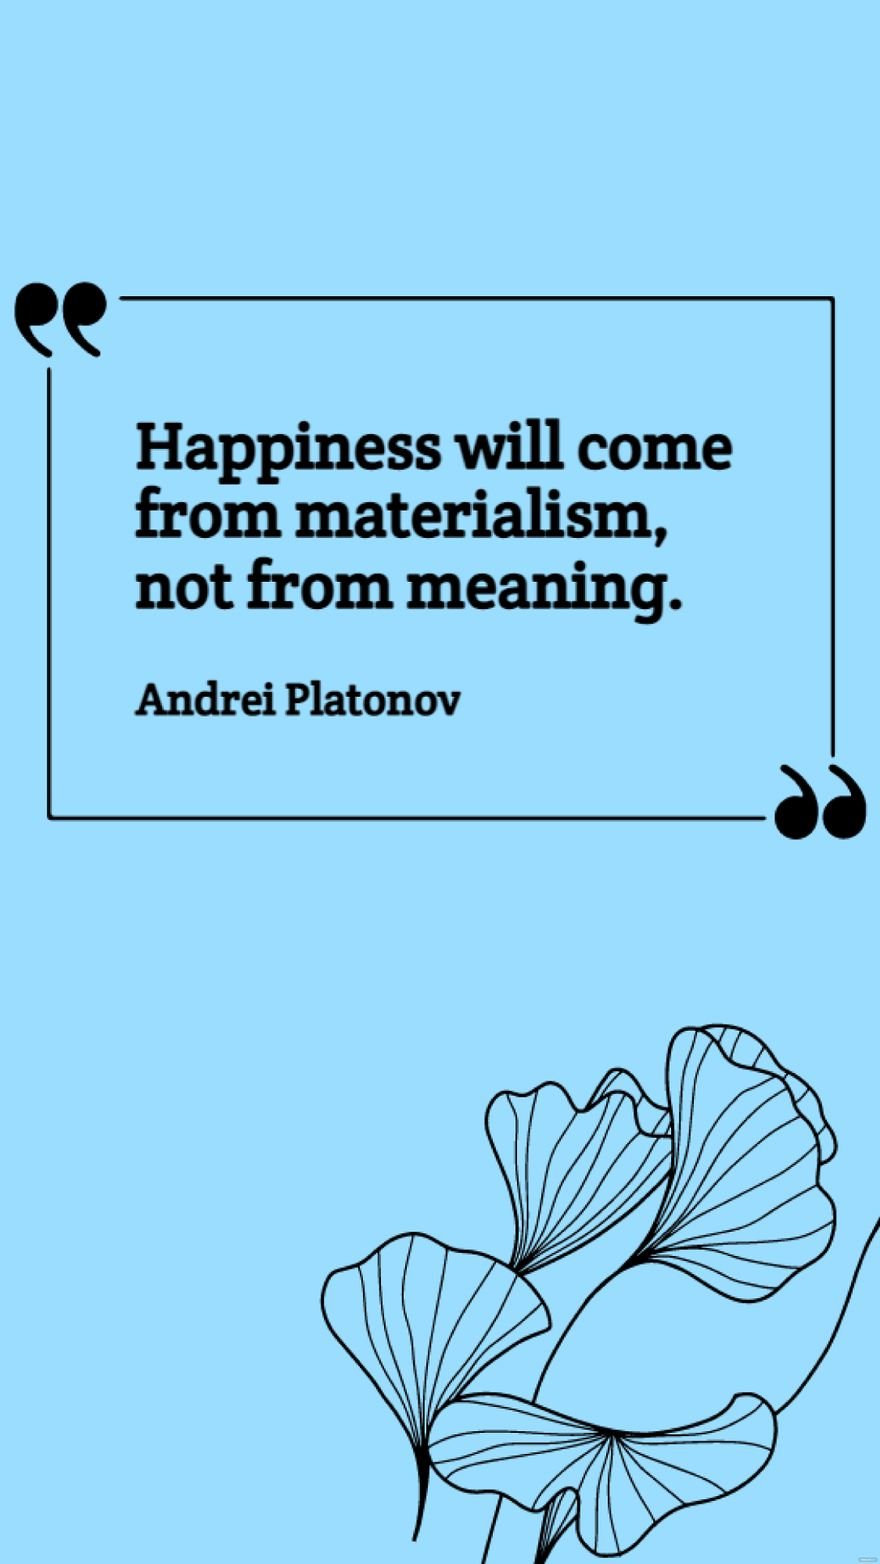 Free Andrei Platonov - Happiness will come from materialism, not from meaning. in JPG